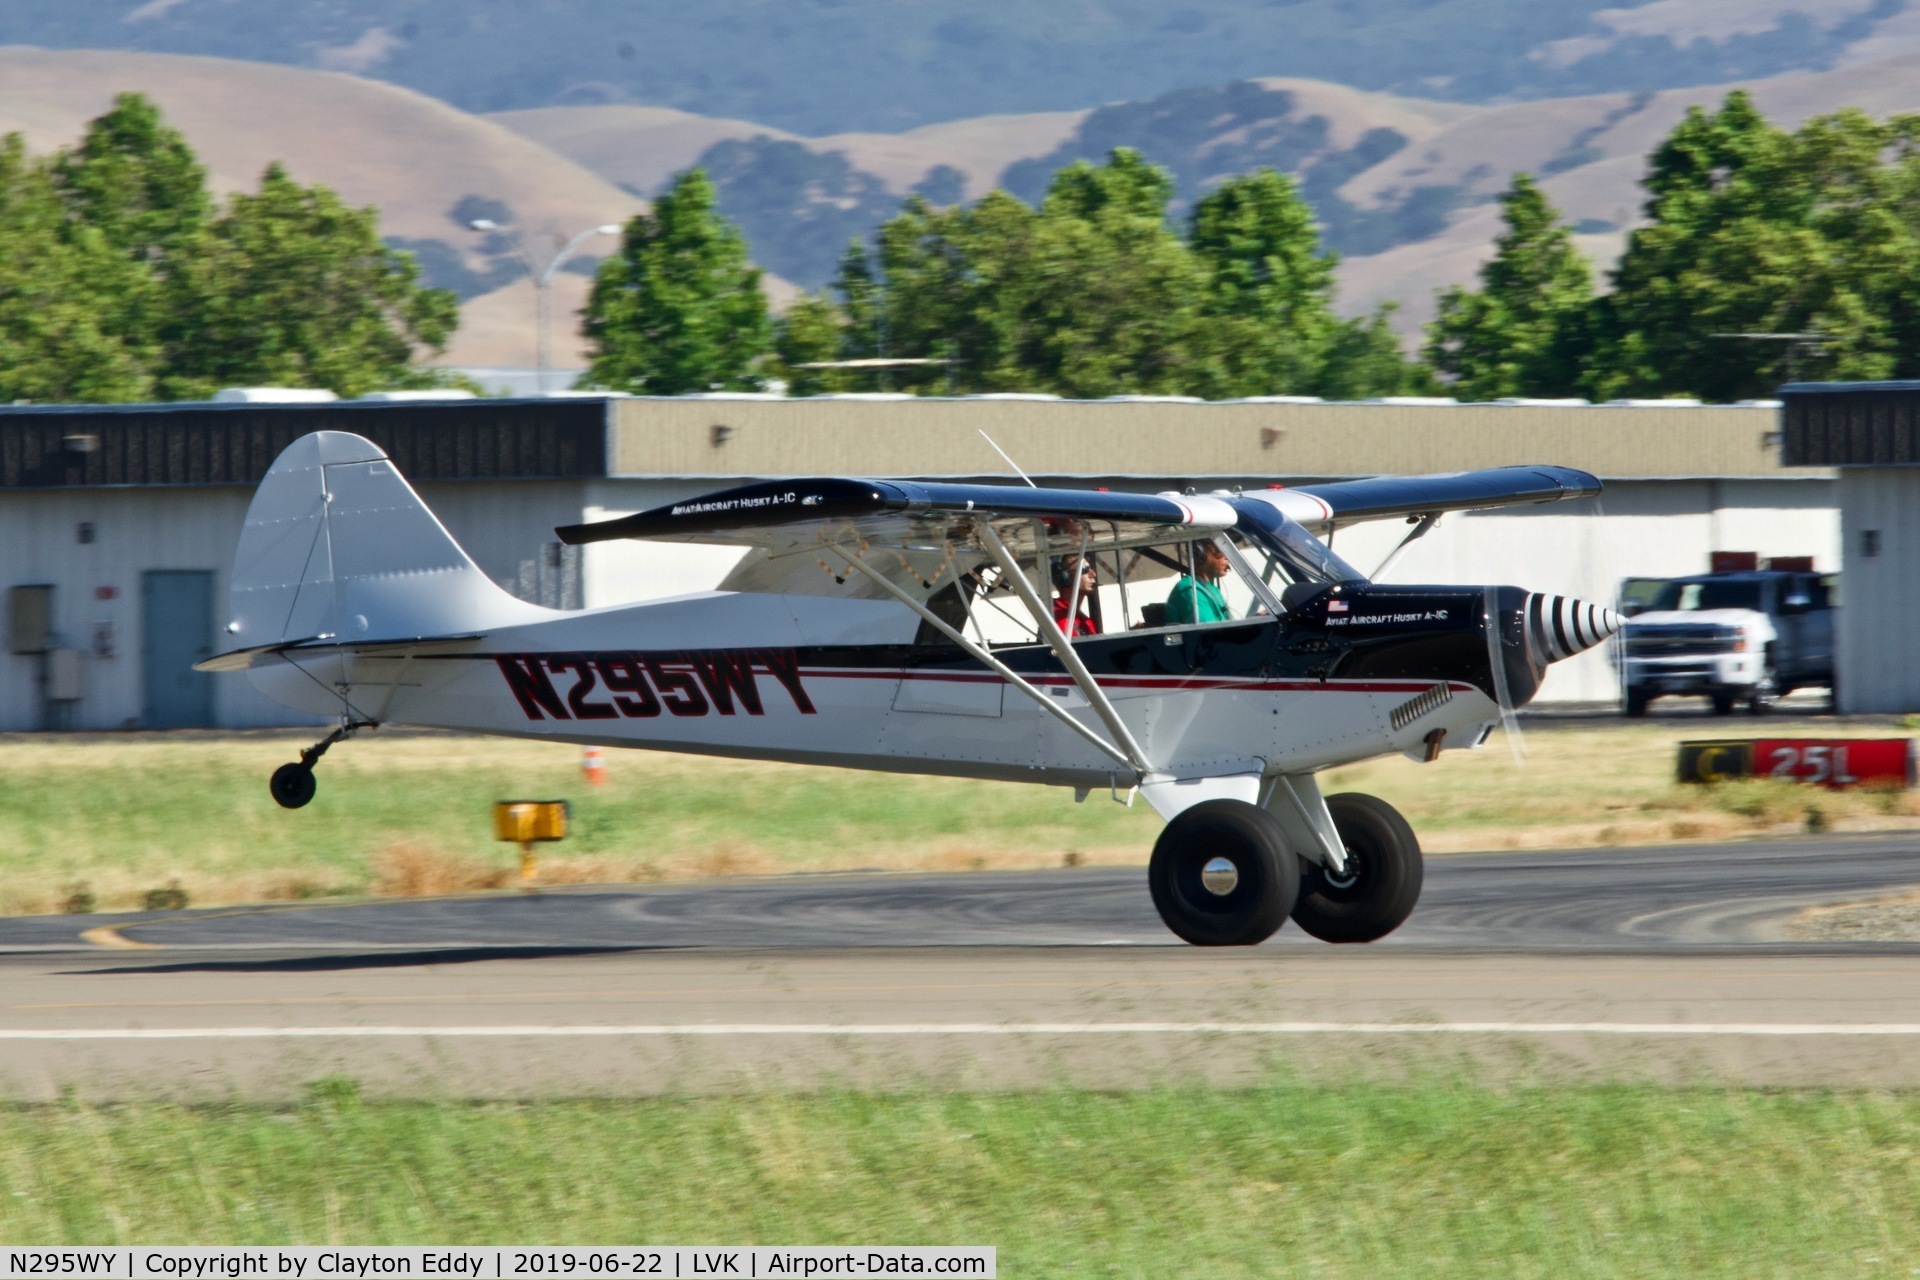 N295WY, 2018 Aviat Husky A-1C-180 C/N 3295, Livermore Airport California 2019.